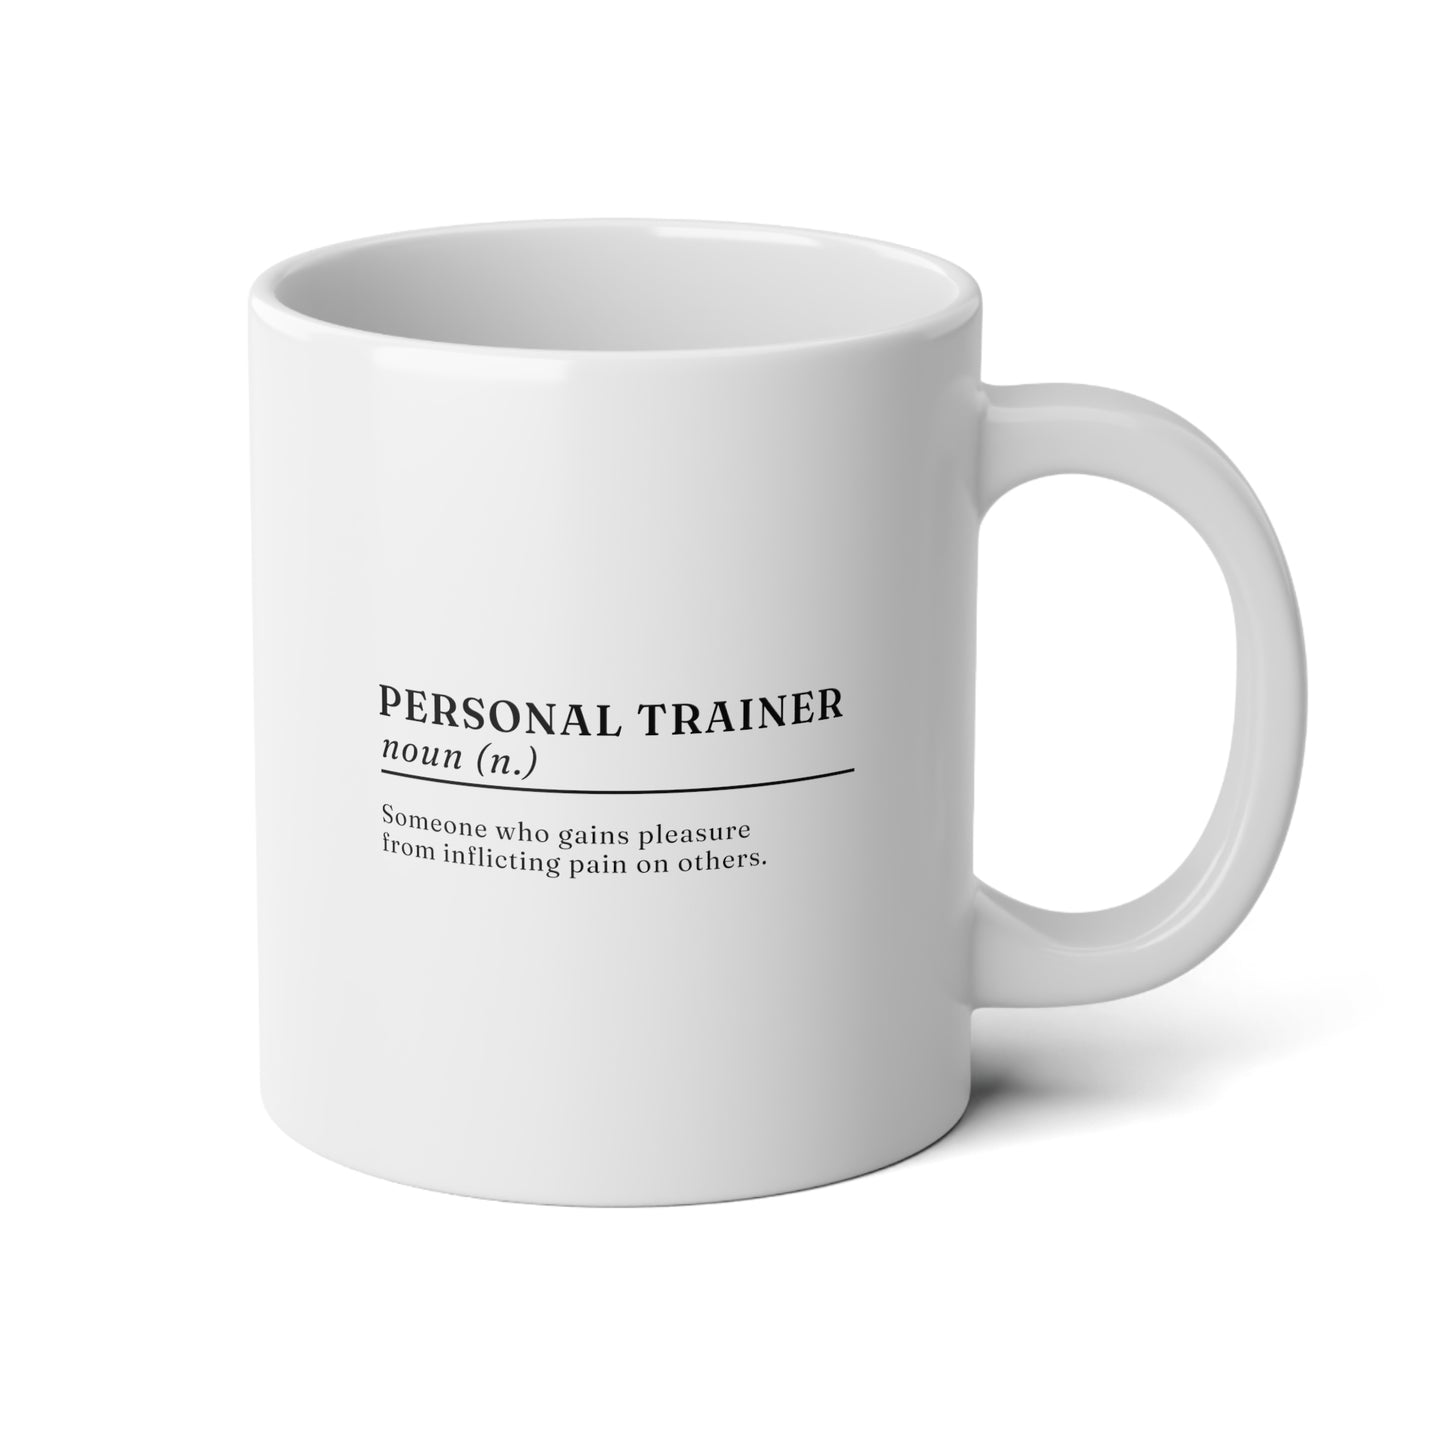 Personal Trainer Definition 20oz white funny large coffee mug gift for fitness instructor exercise workout waveywares wavey wares wavywares wavy wares